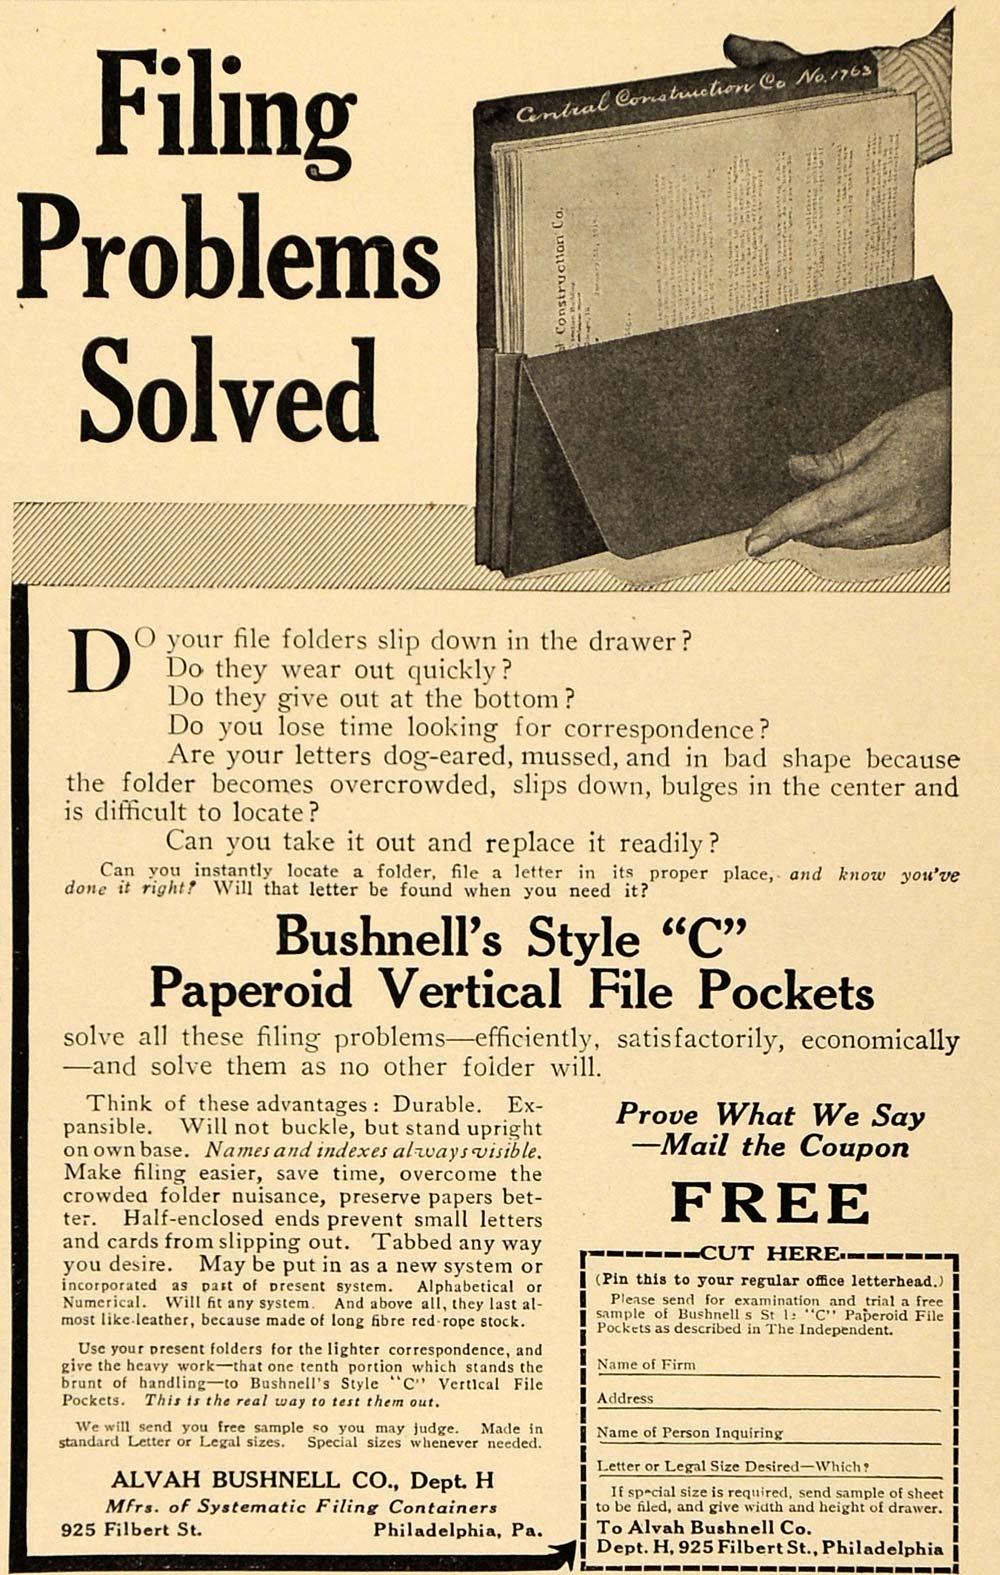 1917 Ad Bushnell Style C Paperoid Vertical File Pockets - ORIGINAL TIN2